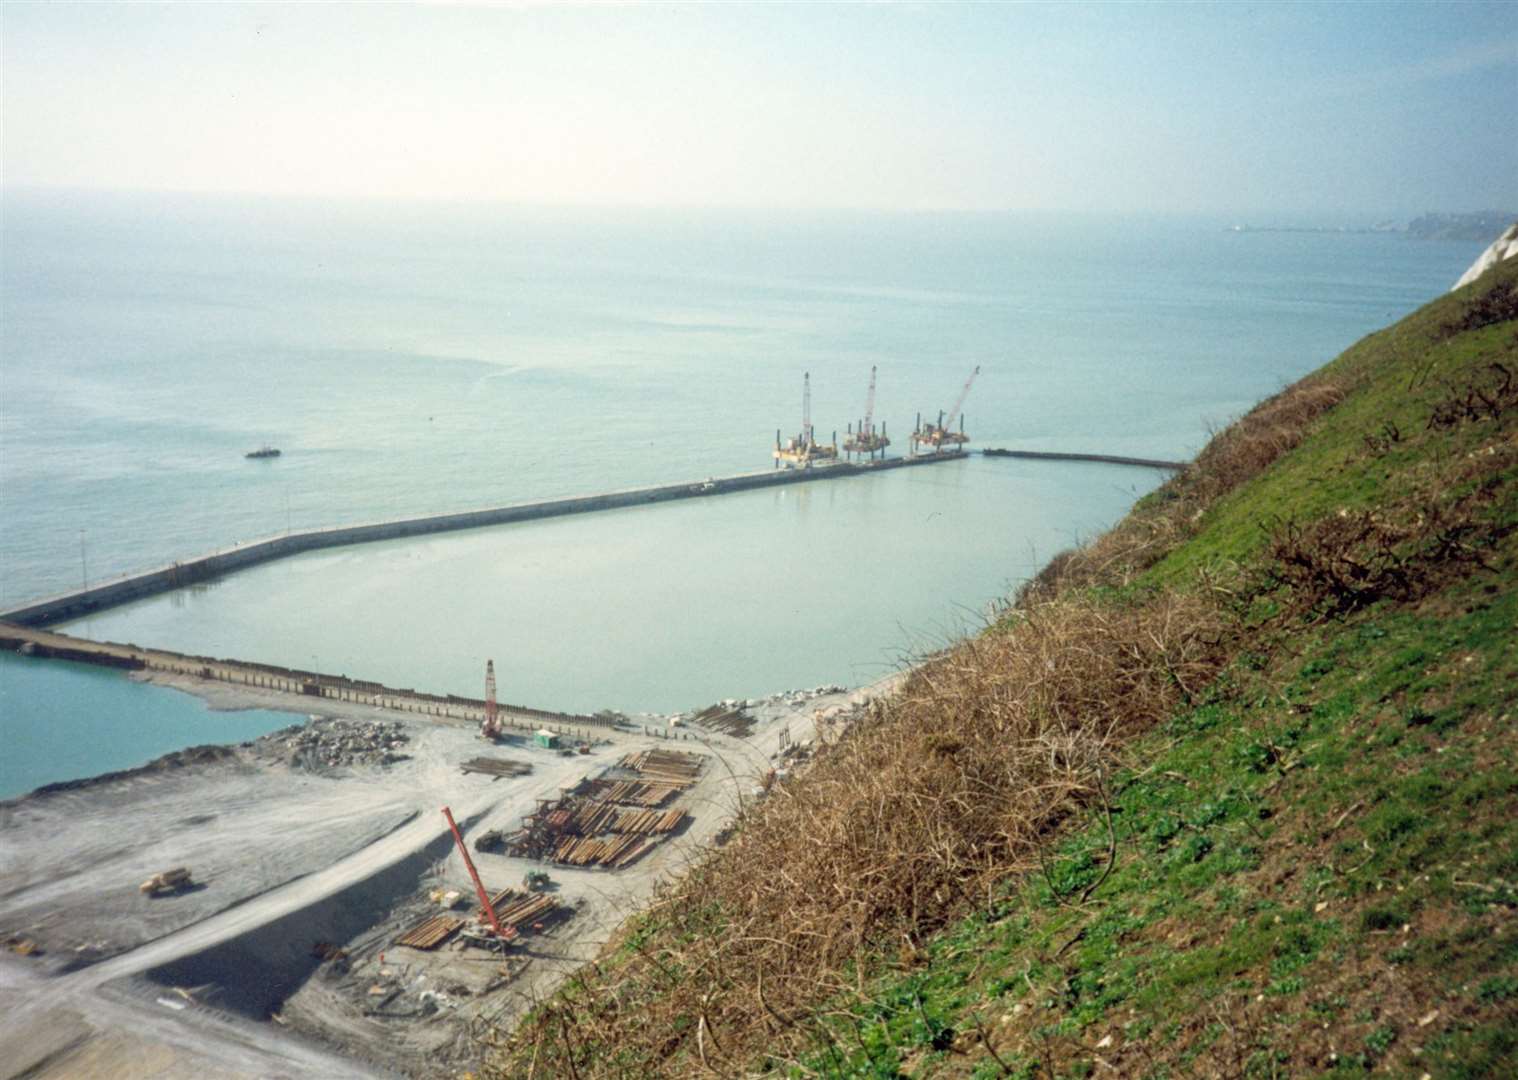 Work of the Channel Tunnel site in 1988, showing the lagoons to be filled with excavated spoil to create Samphire Hoe